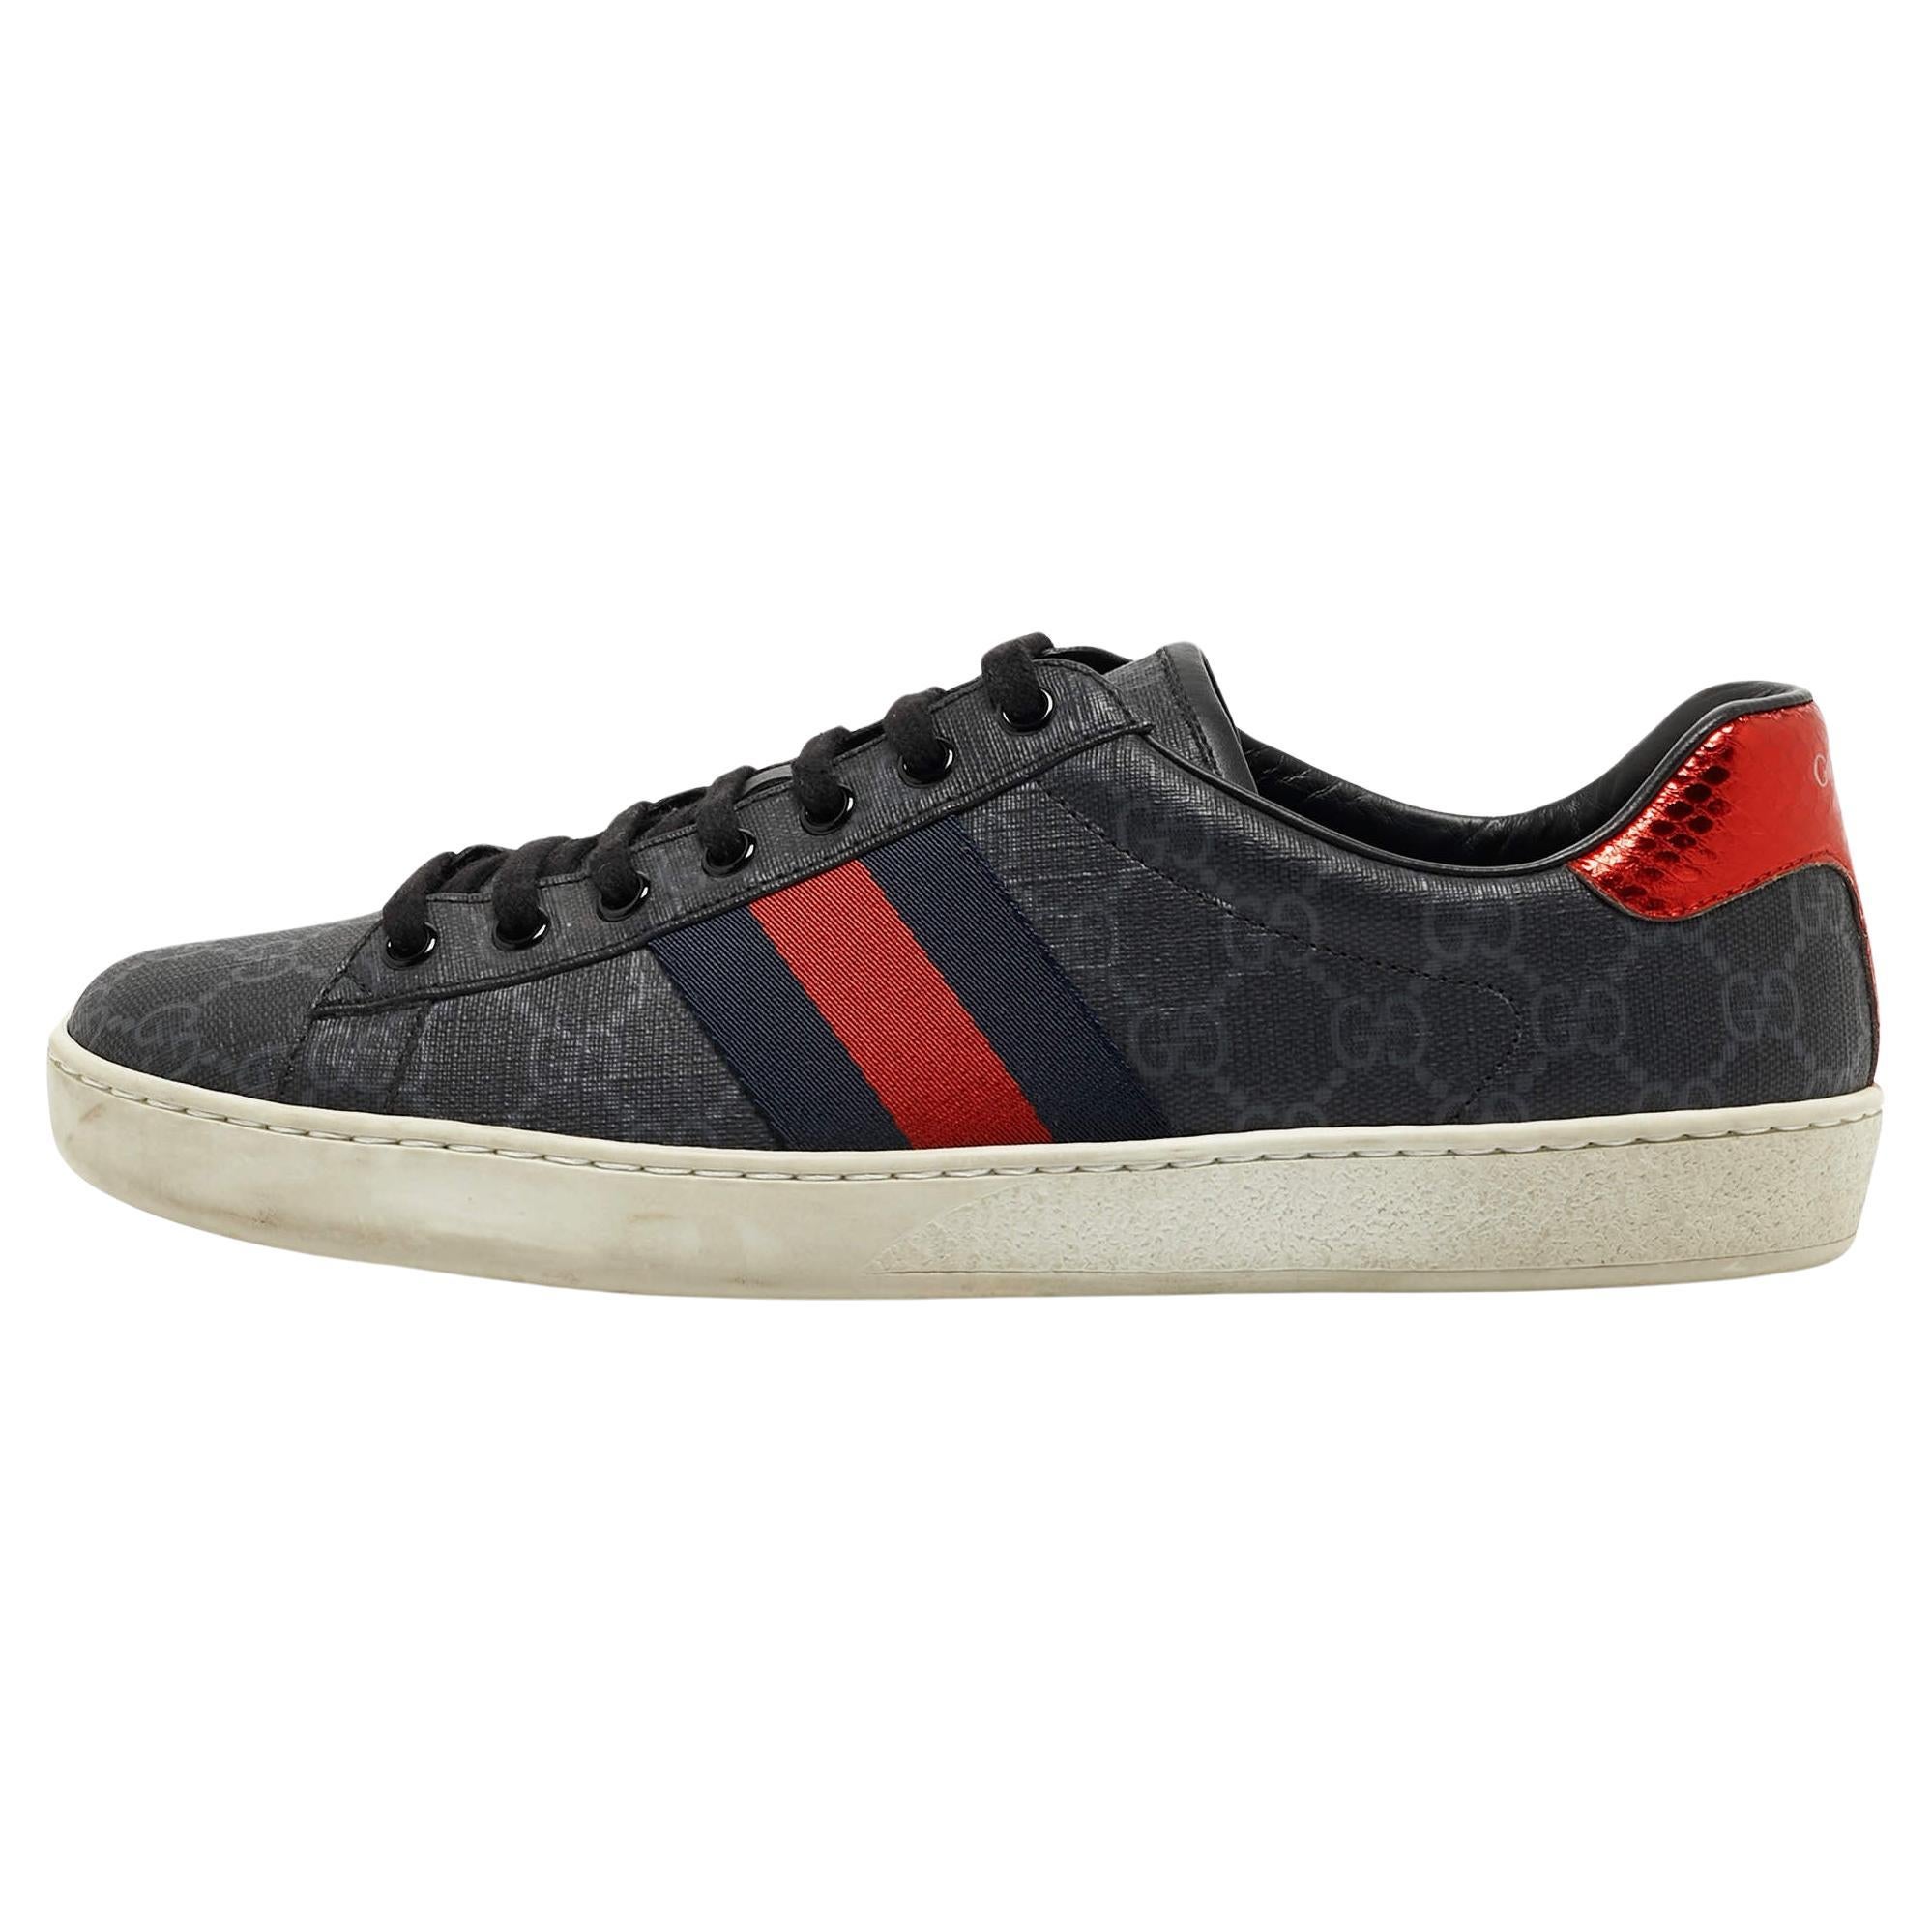 Gucci Two Tone GG Supreme Canvas Ace Sneakers Size 42.5 For Sale